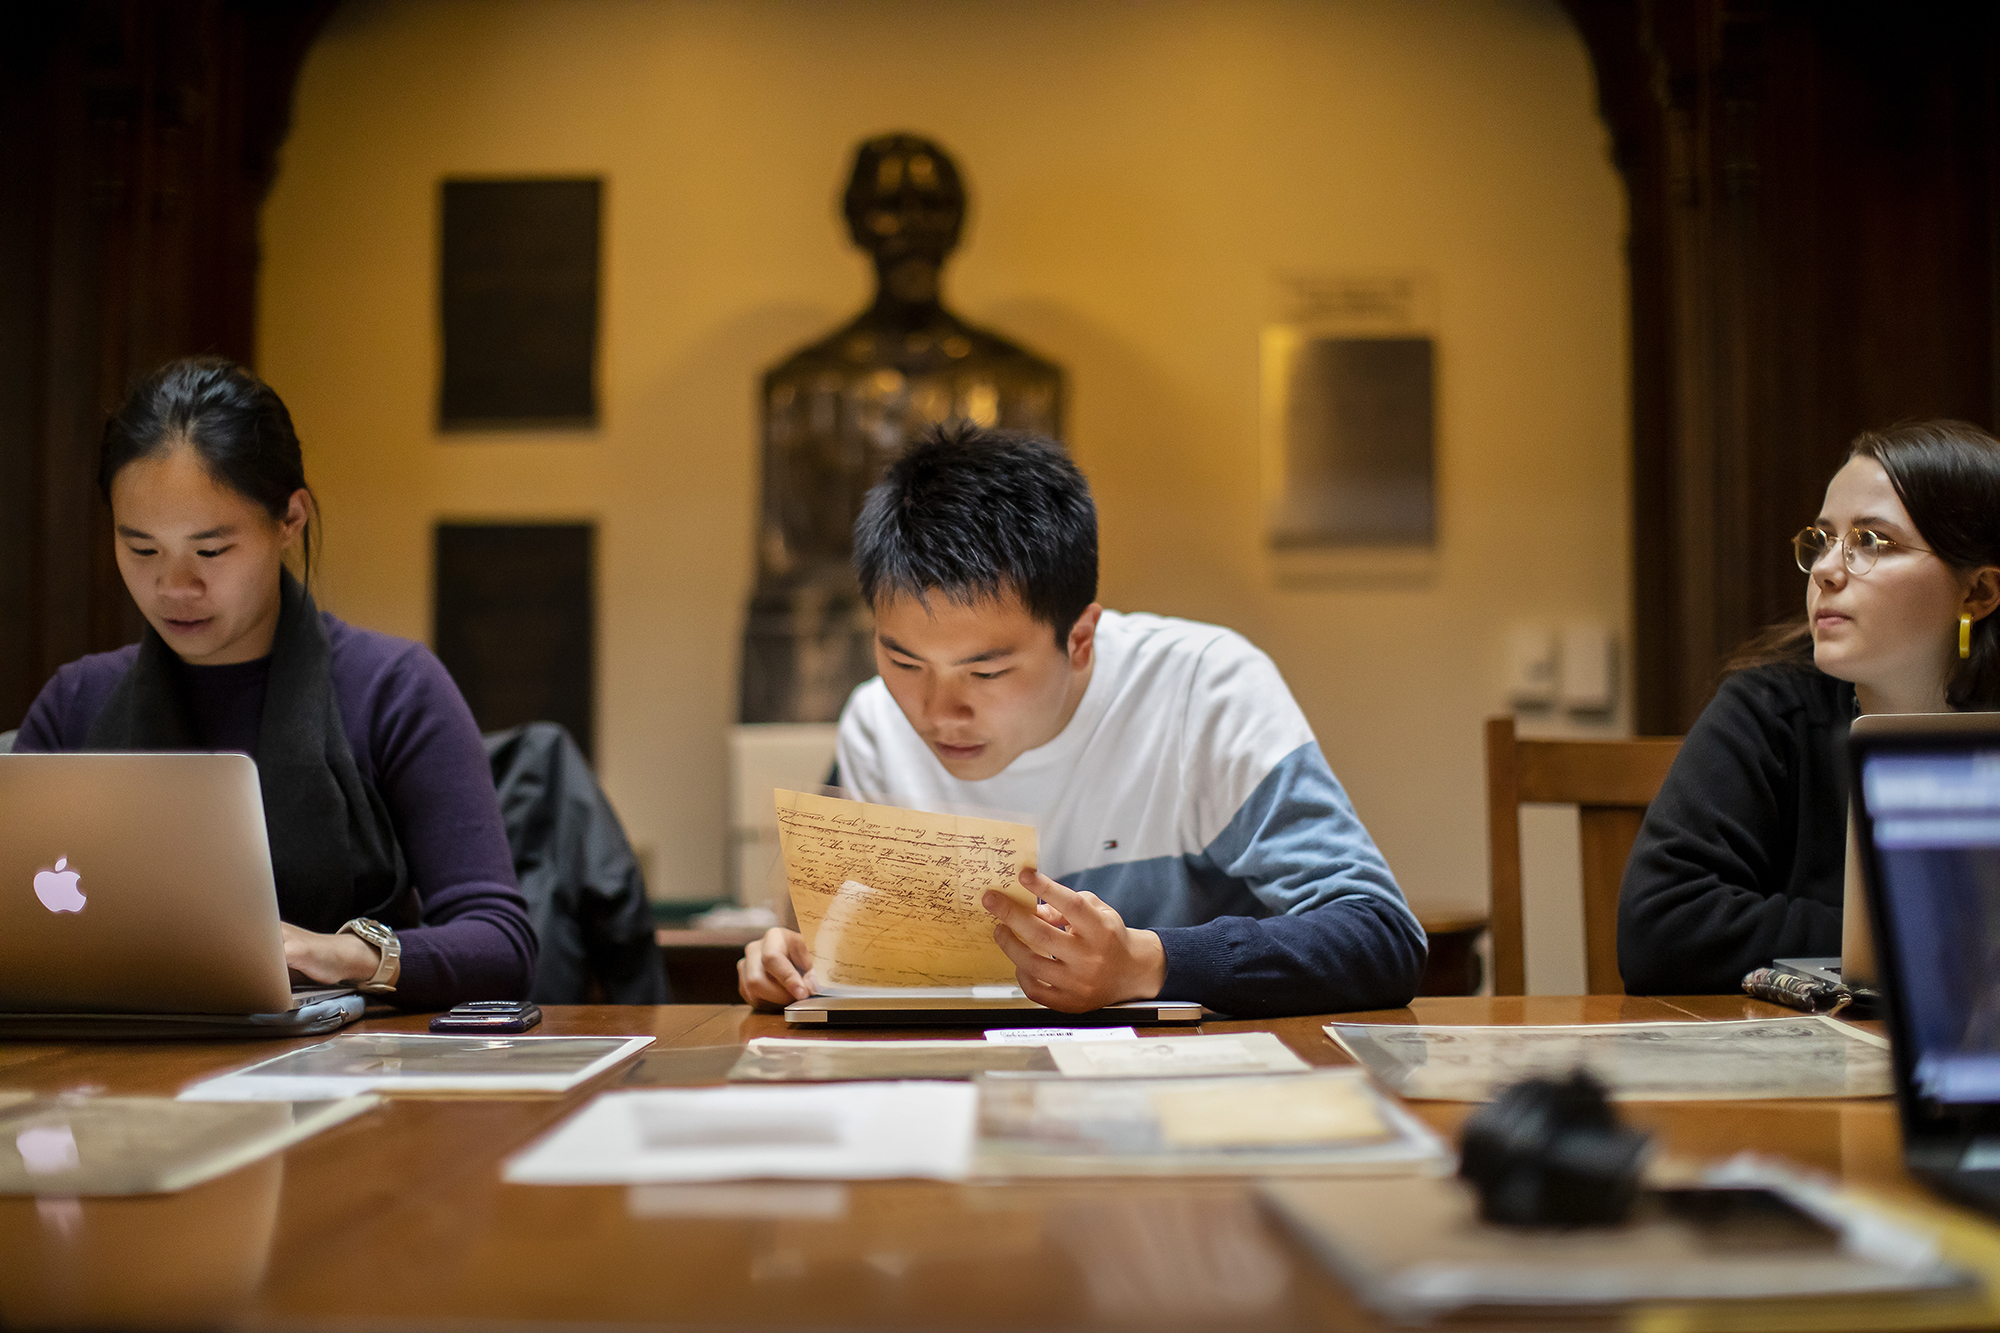 Student looking closely at a rare document in a plastic sleeve he is holding, while seated in a library.